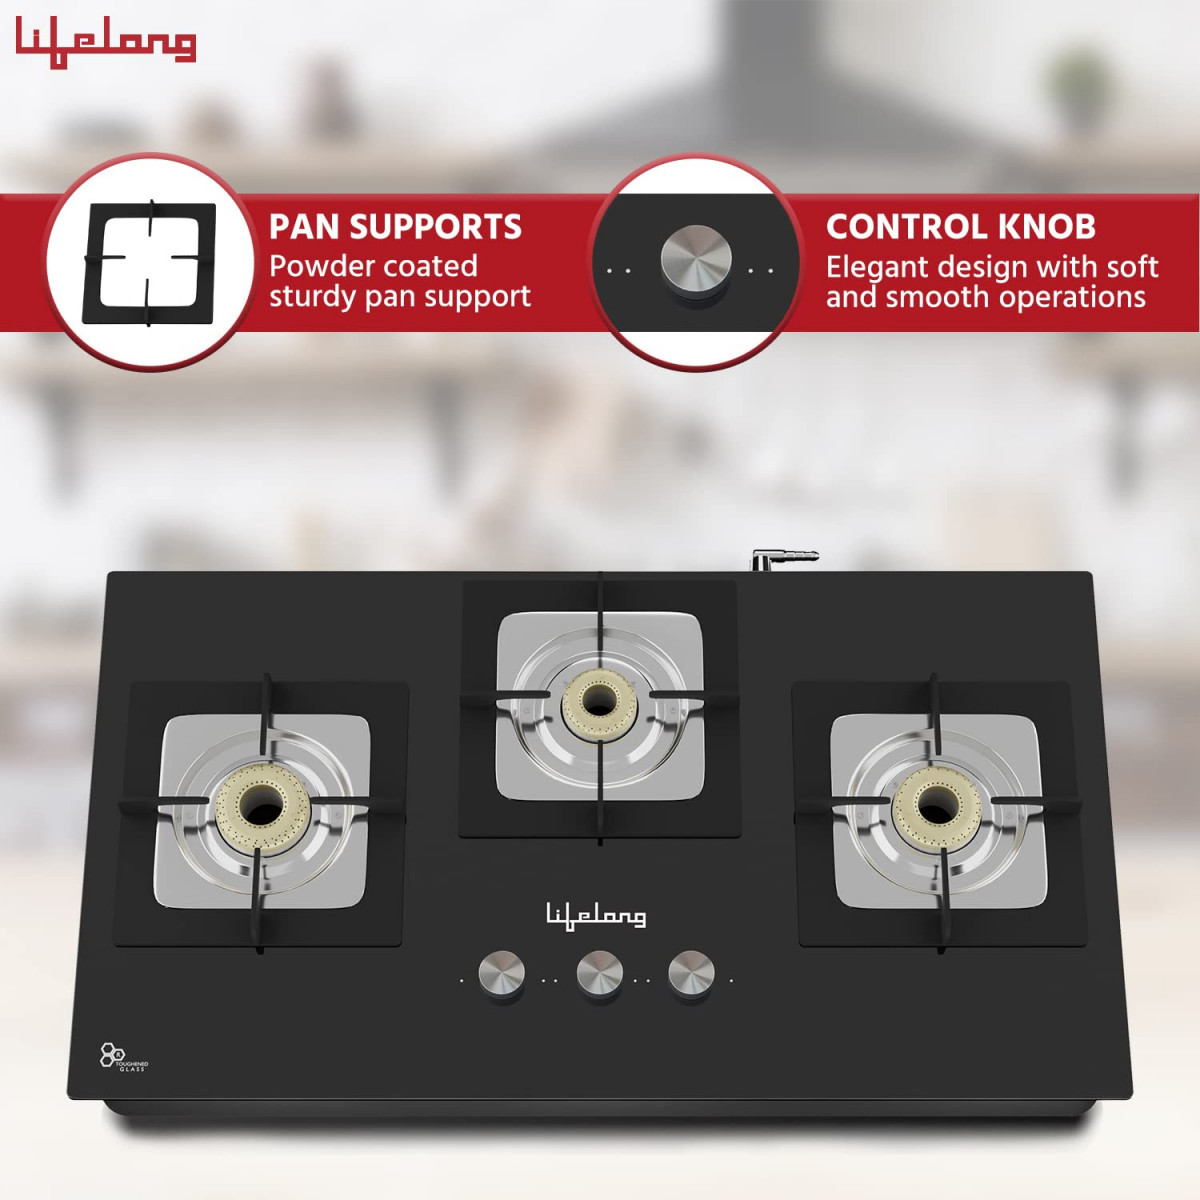 Lifelong 3 Gas Burner Top - 3 Burners Hob Top Gas Stove with Manual Ignition - Toughened Glass top Gas Stoves for Home  Kitchen - Manual Gas stove for modernmodular kitchen Lexus LLHT003